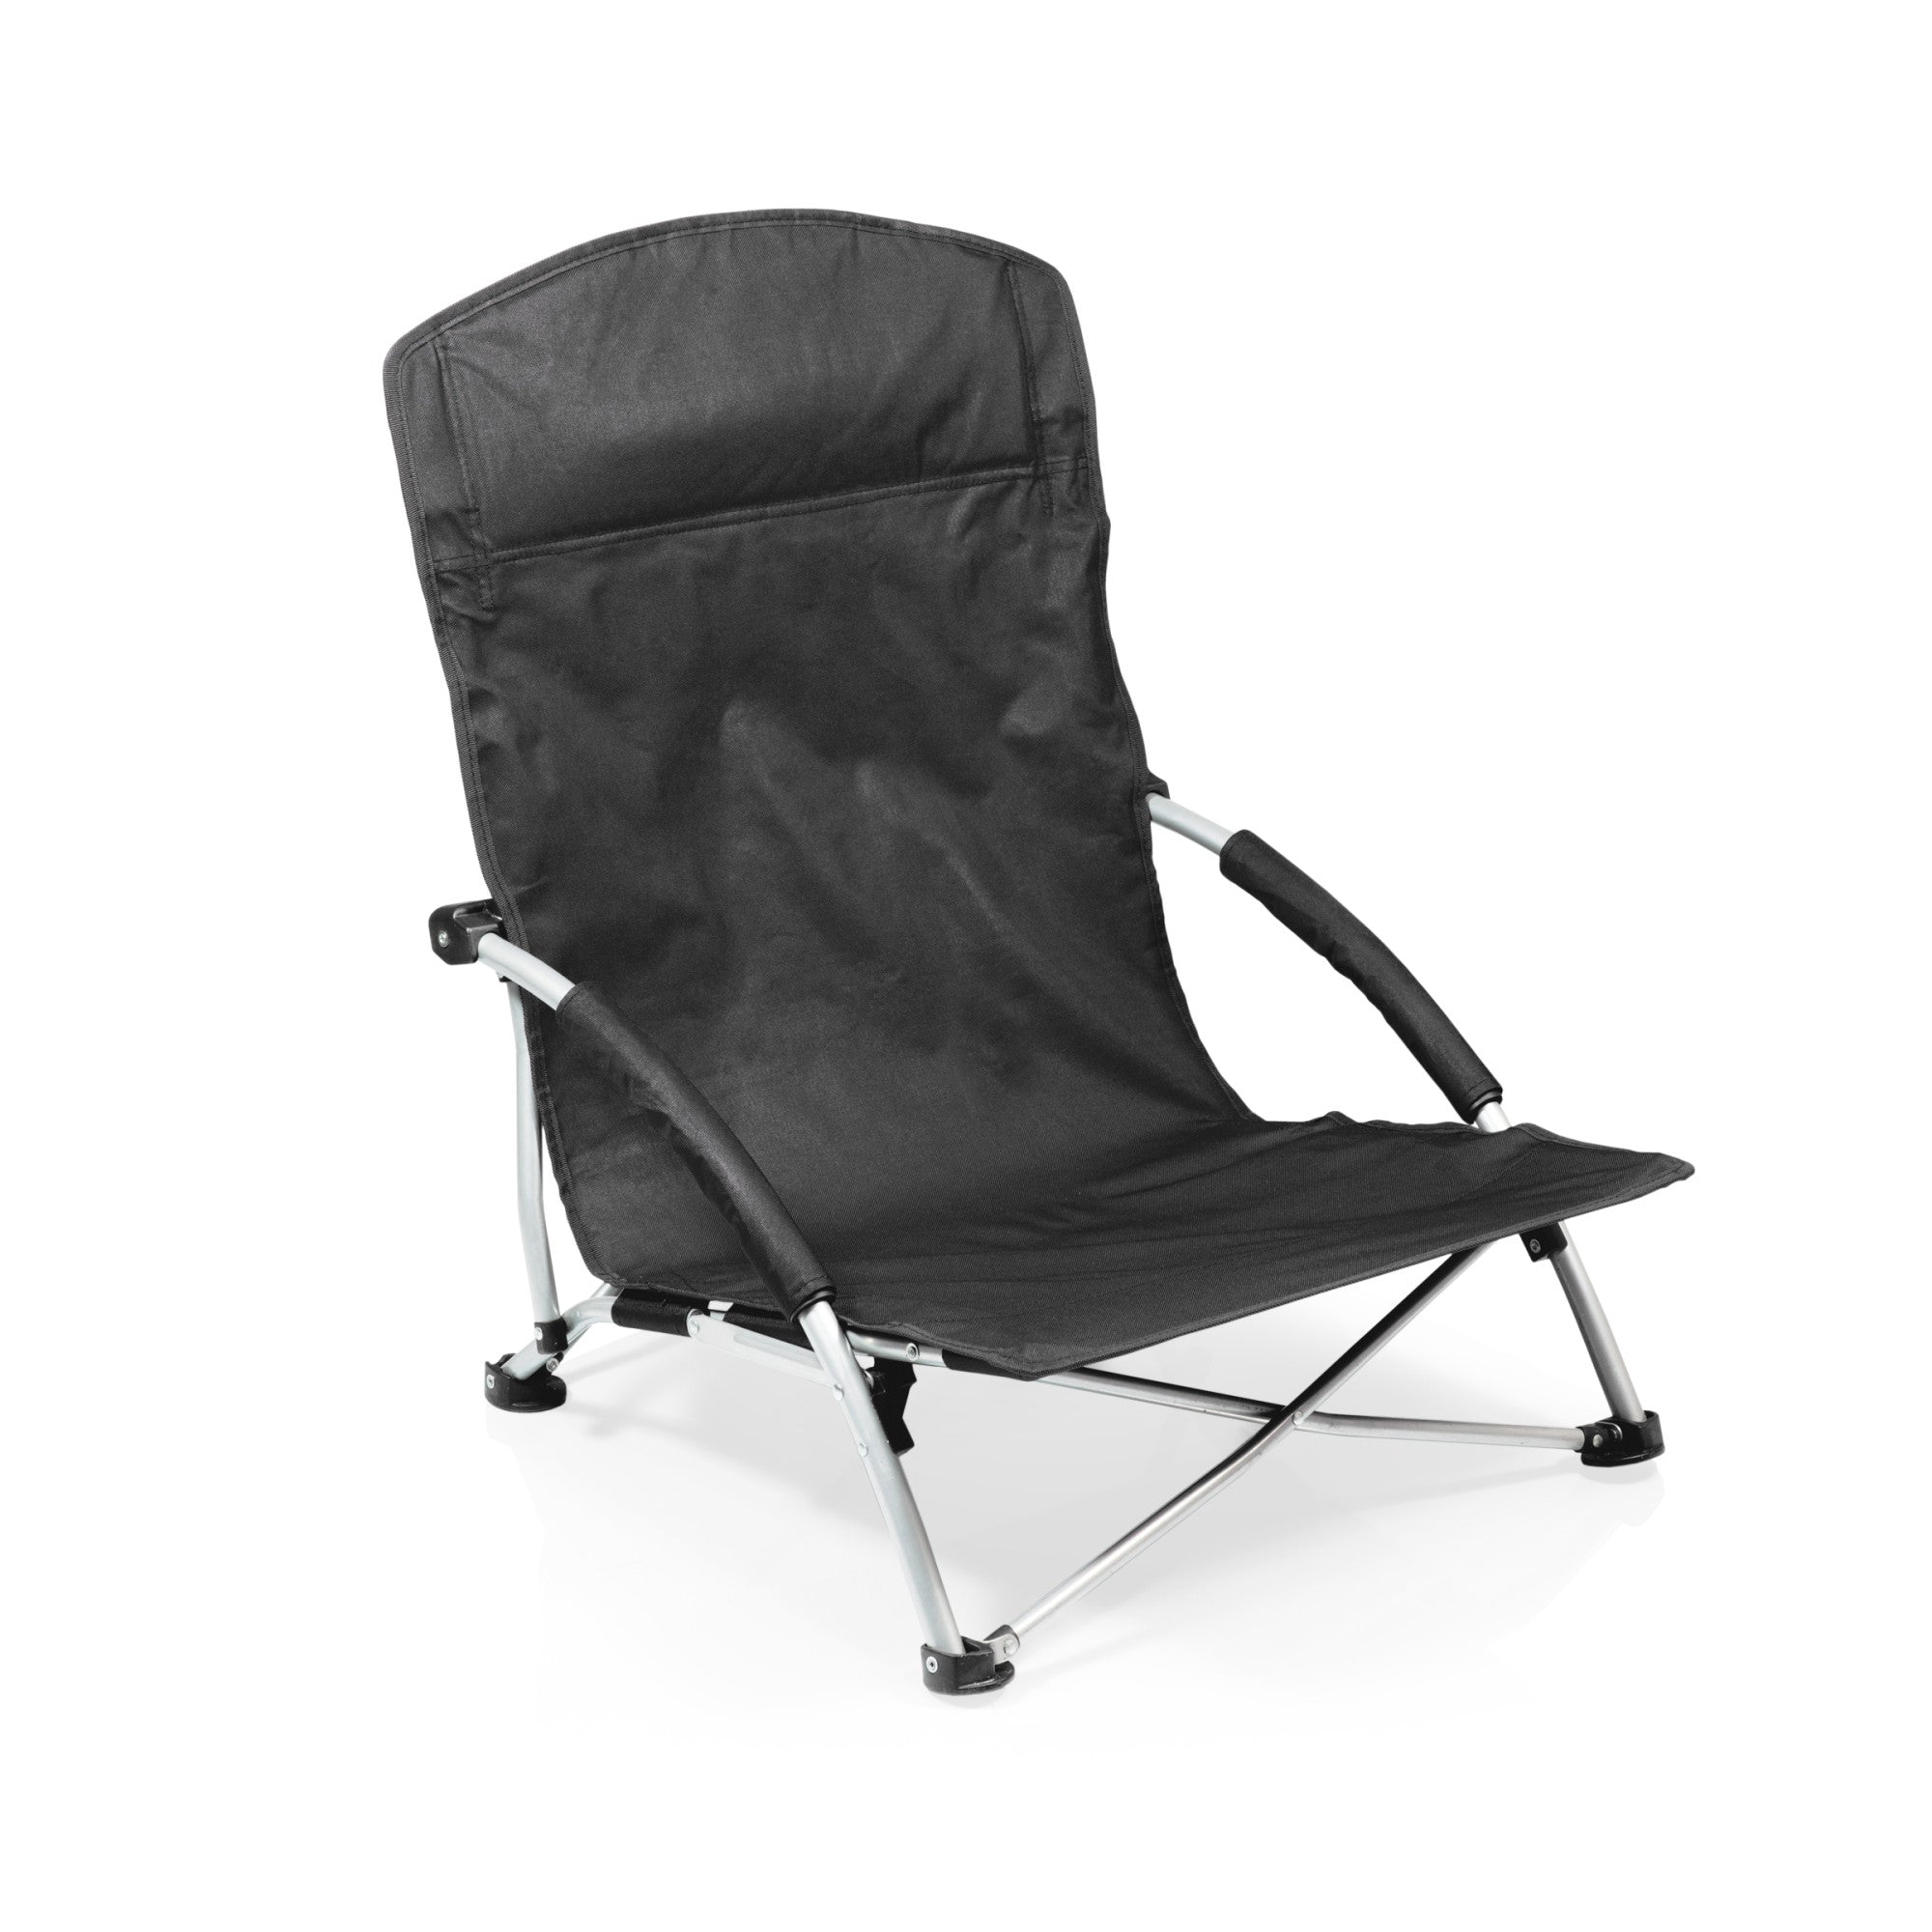 Army Black Knights - Tranquility Beach Chair with Carry Bag